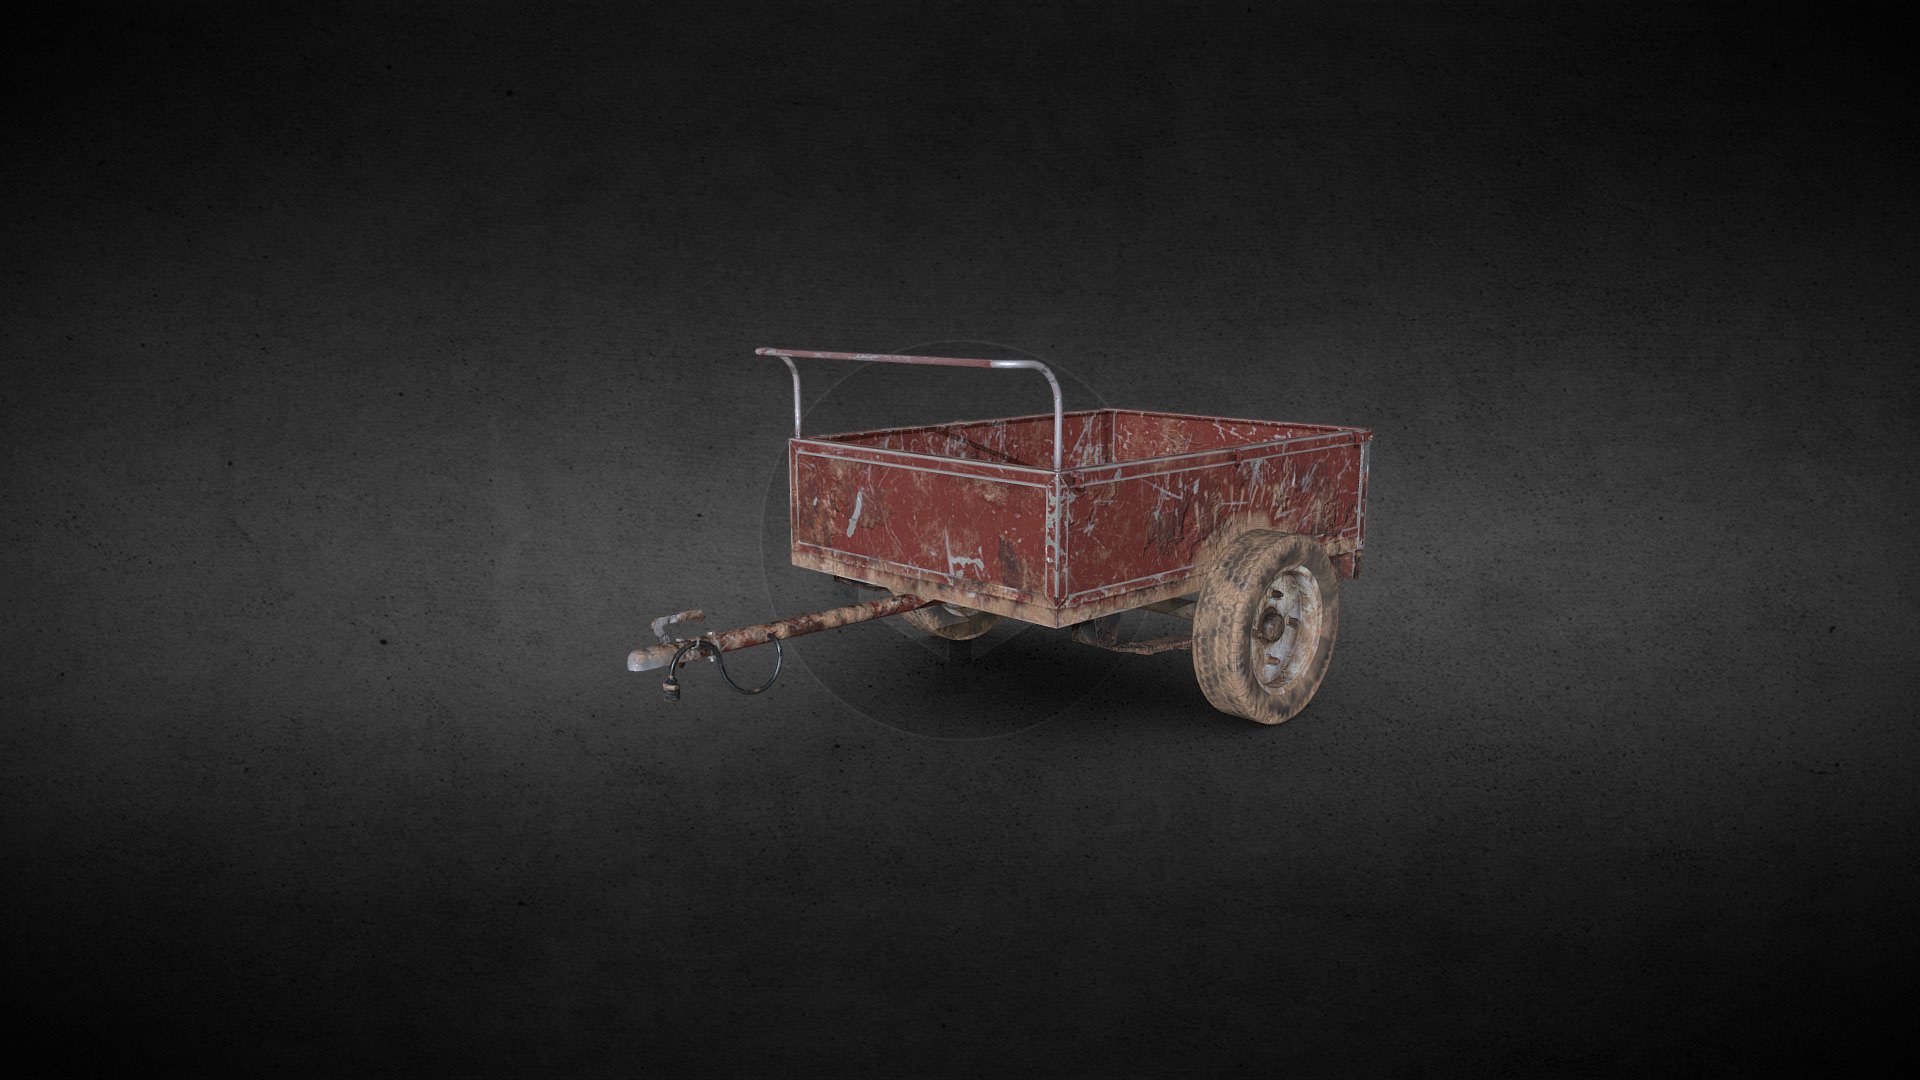 A simple, low poly model of a car trailer which looks a bit like an ancient chariot :)

Modeled in Blender 2.91. Textured in Inkscape (basic bump maps lately converted into normal maps) and Quixel Mixer.

Free download.

I hope you'd like it :) - Car Trailer "the Chariot" - Download Free 3D model by KrStolorz (Krzysztof Stolorz) (@KrStolorz) 3d model